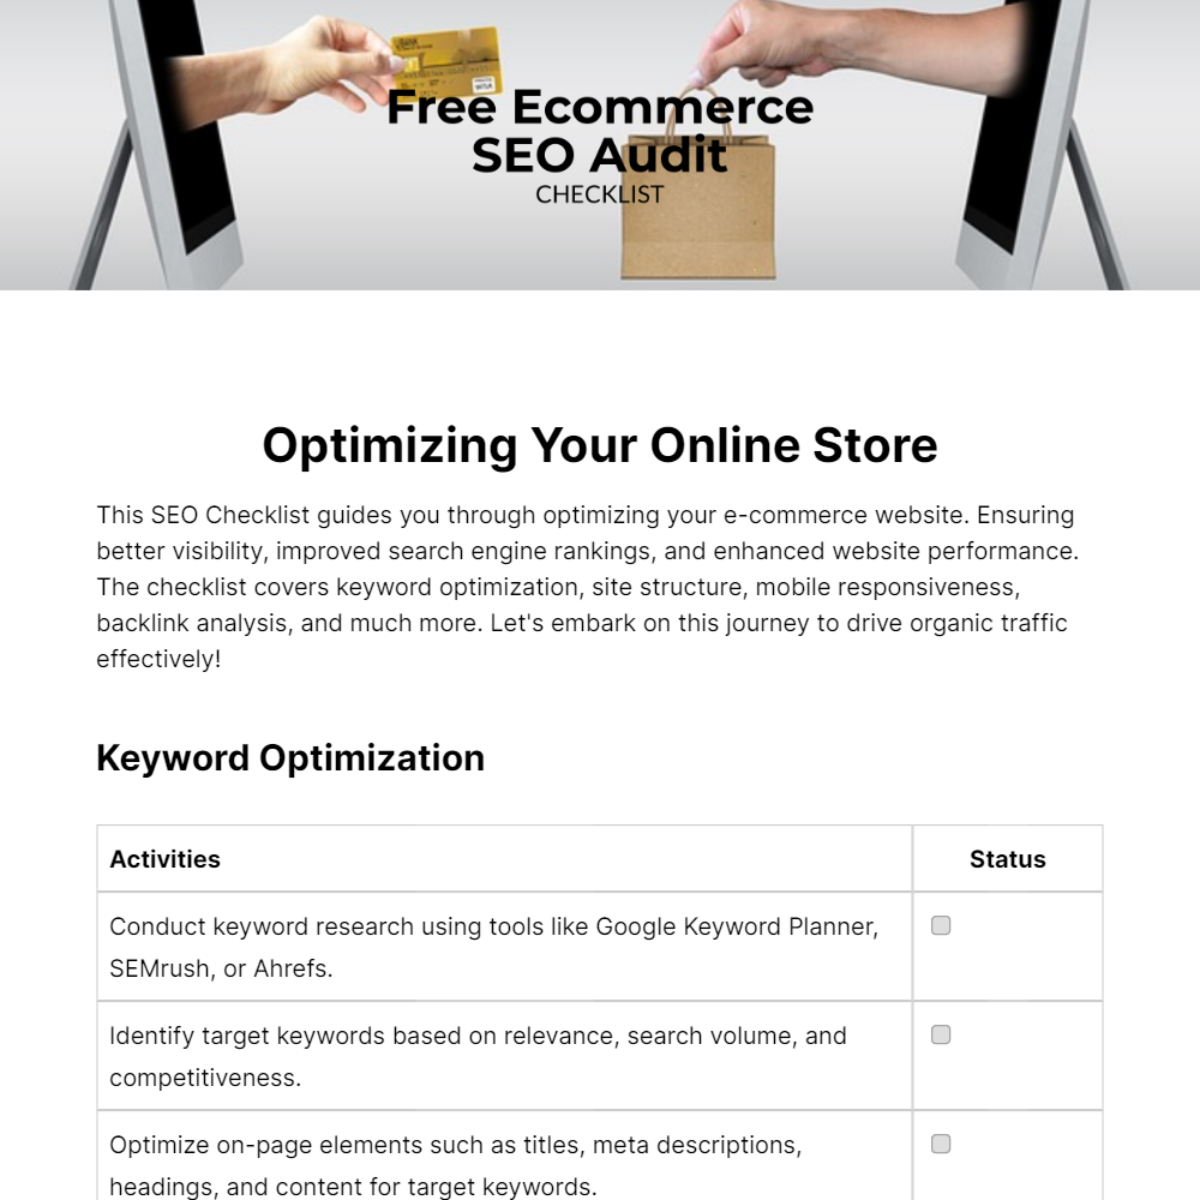 Free Ecommerce SEO Audit Checklist Template